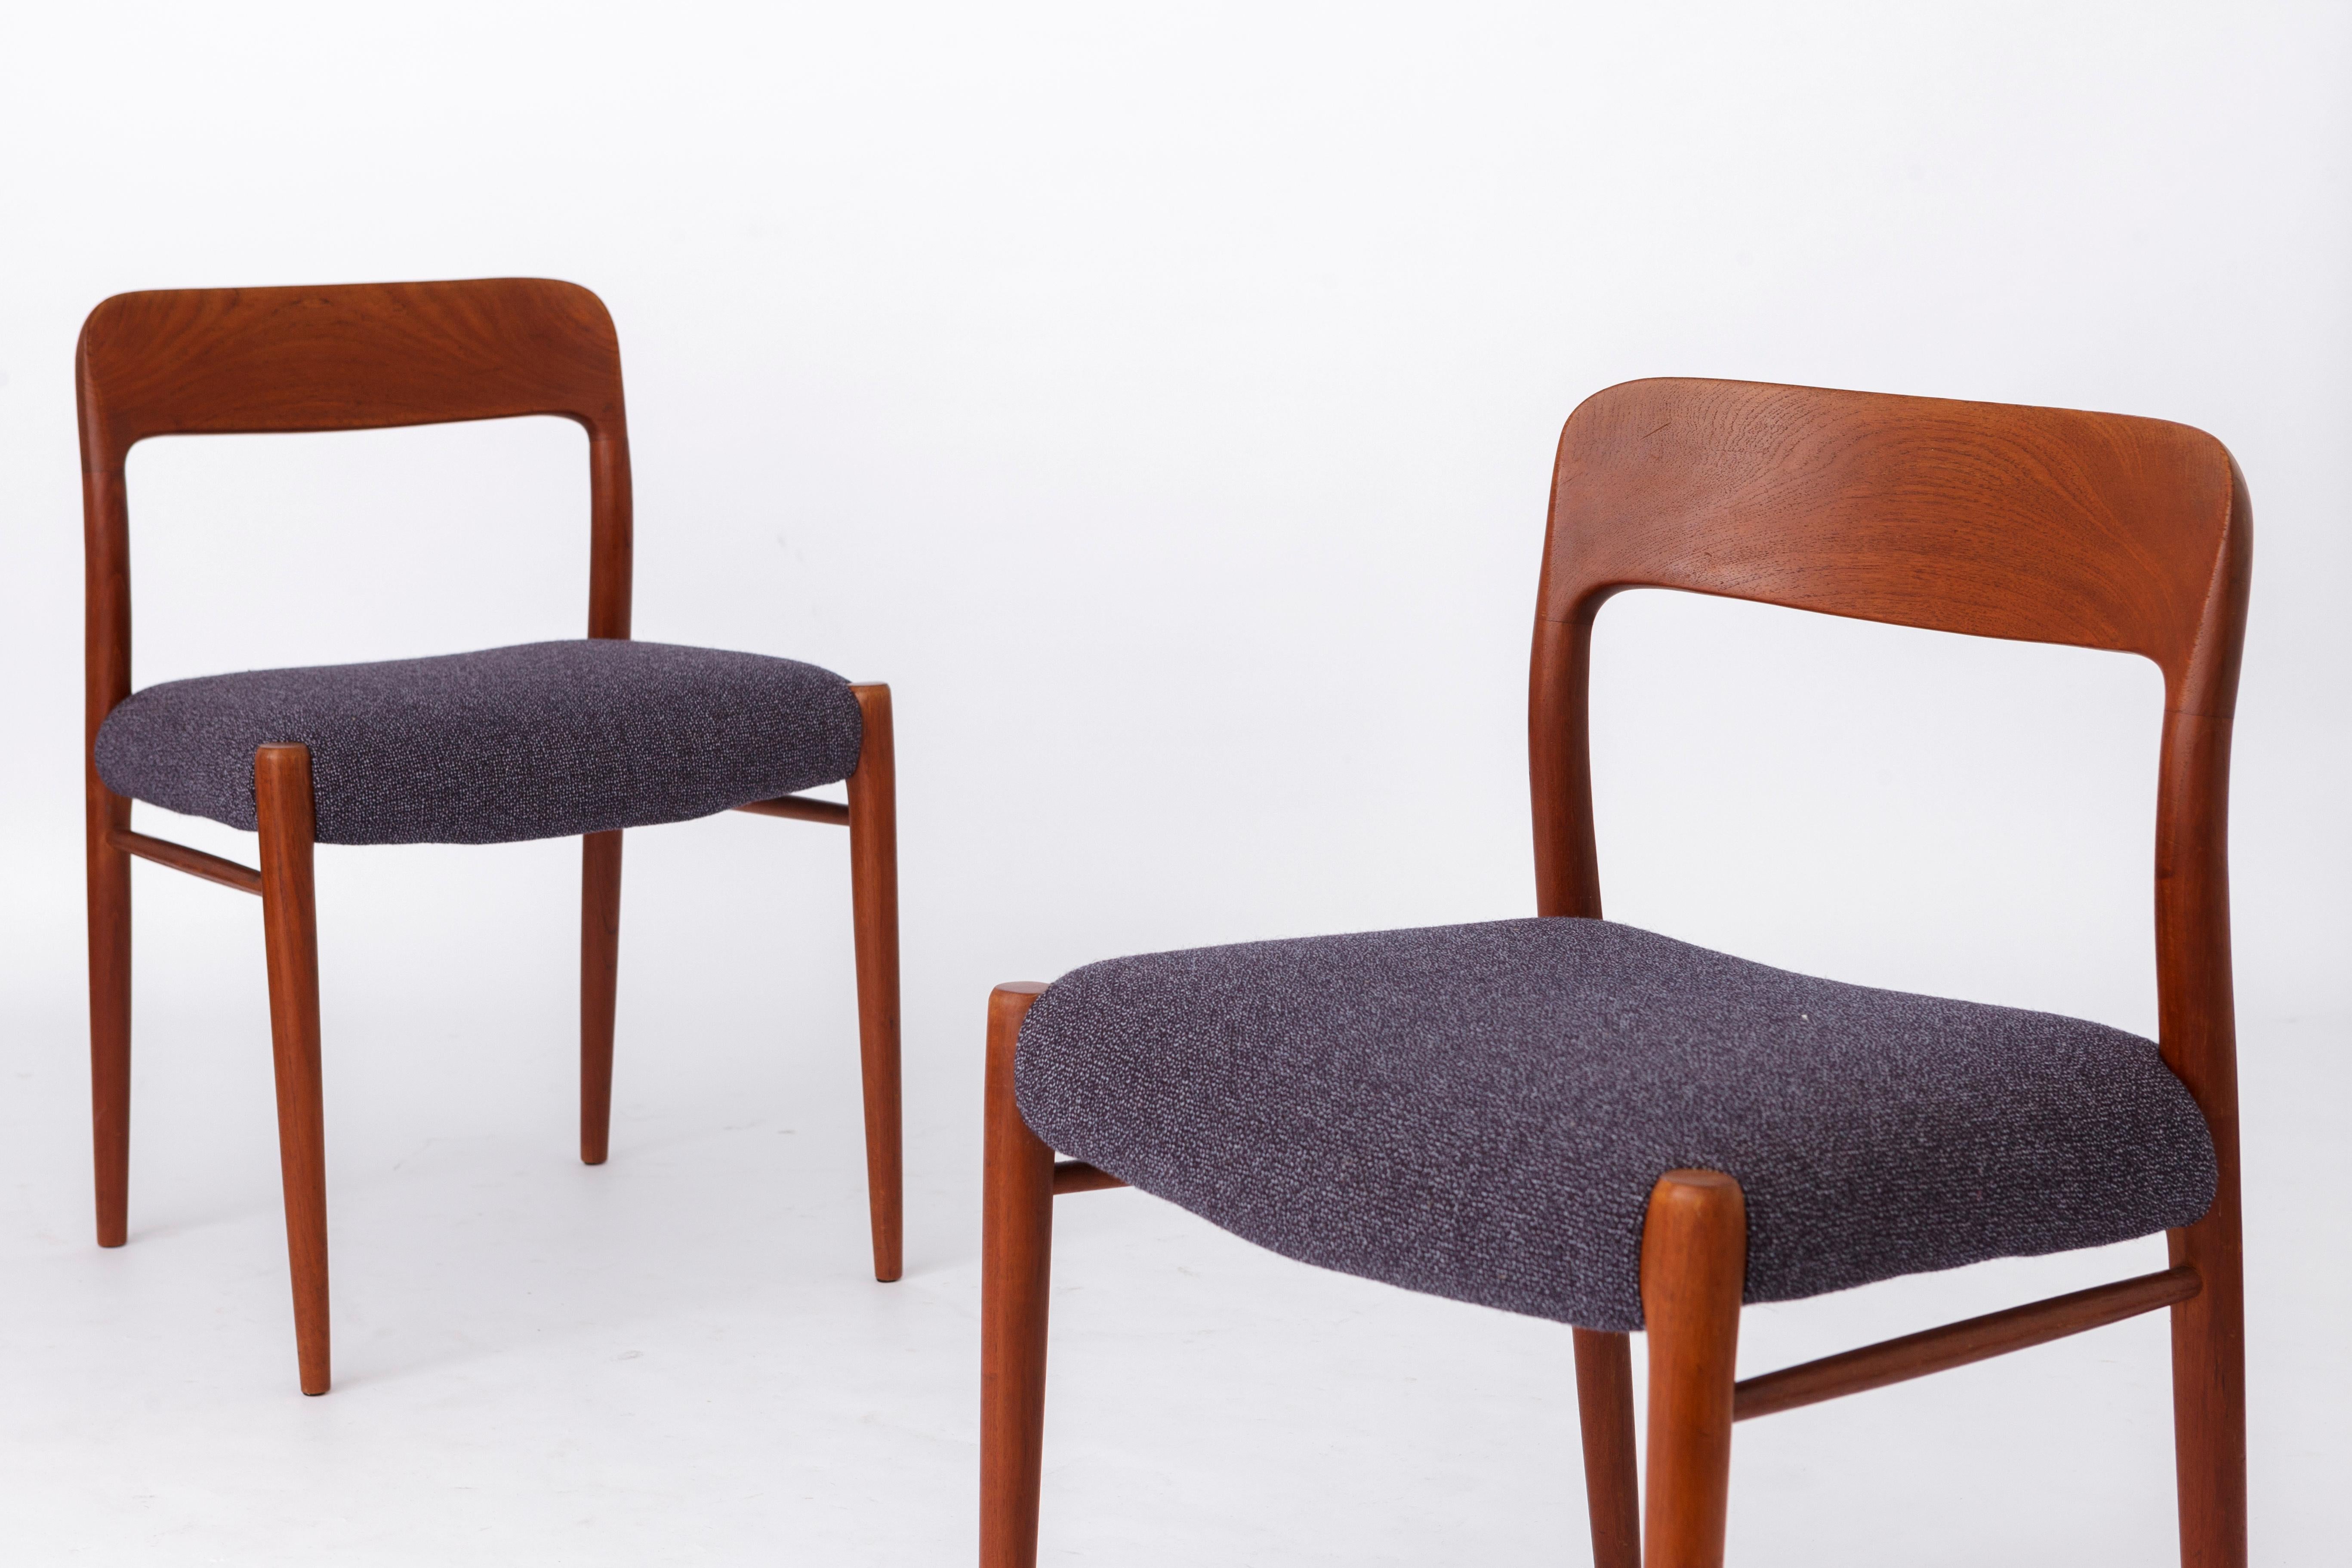 2 Vintage chairs by Niels Otto Moller. 
Model: 75 in teak from the 1950s. 
Displayed price is for 2 chairs. 

Sturdy teak wood frame. Refurbished and oiled.
Dark blue textile seat cover was made by a professional upholsterer. 